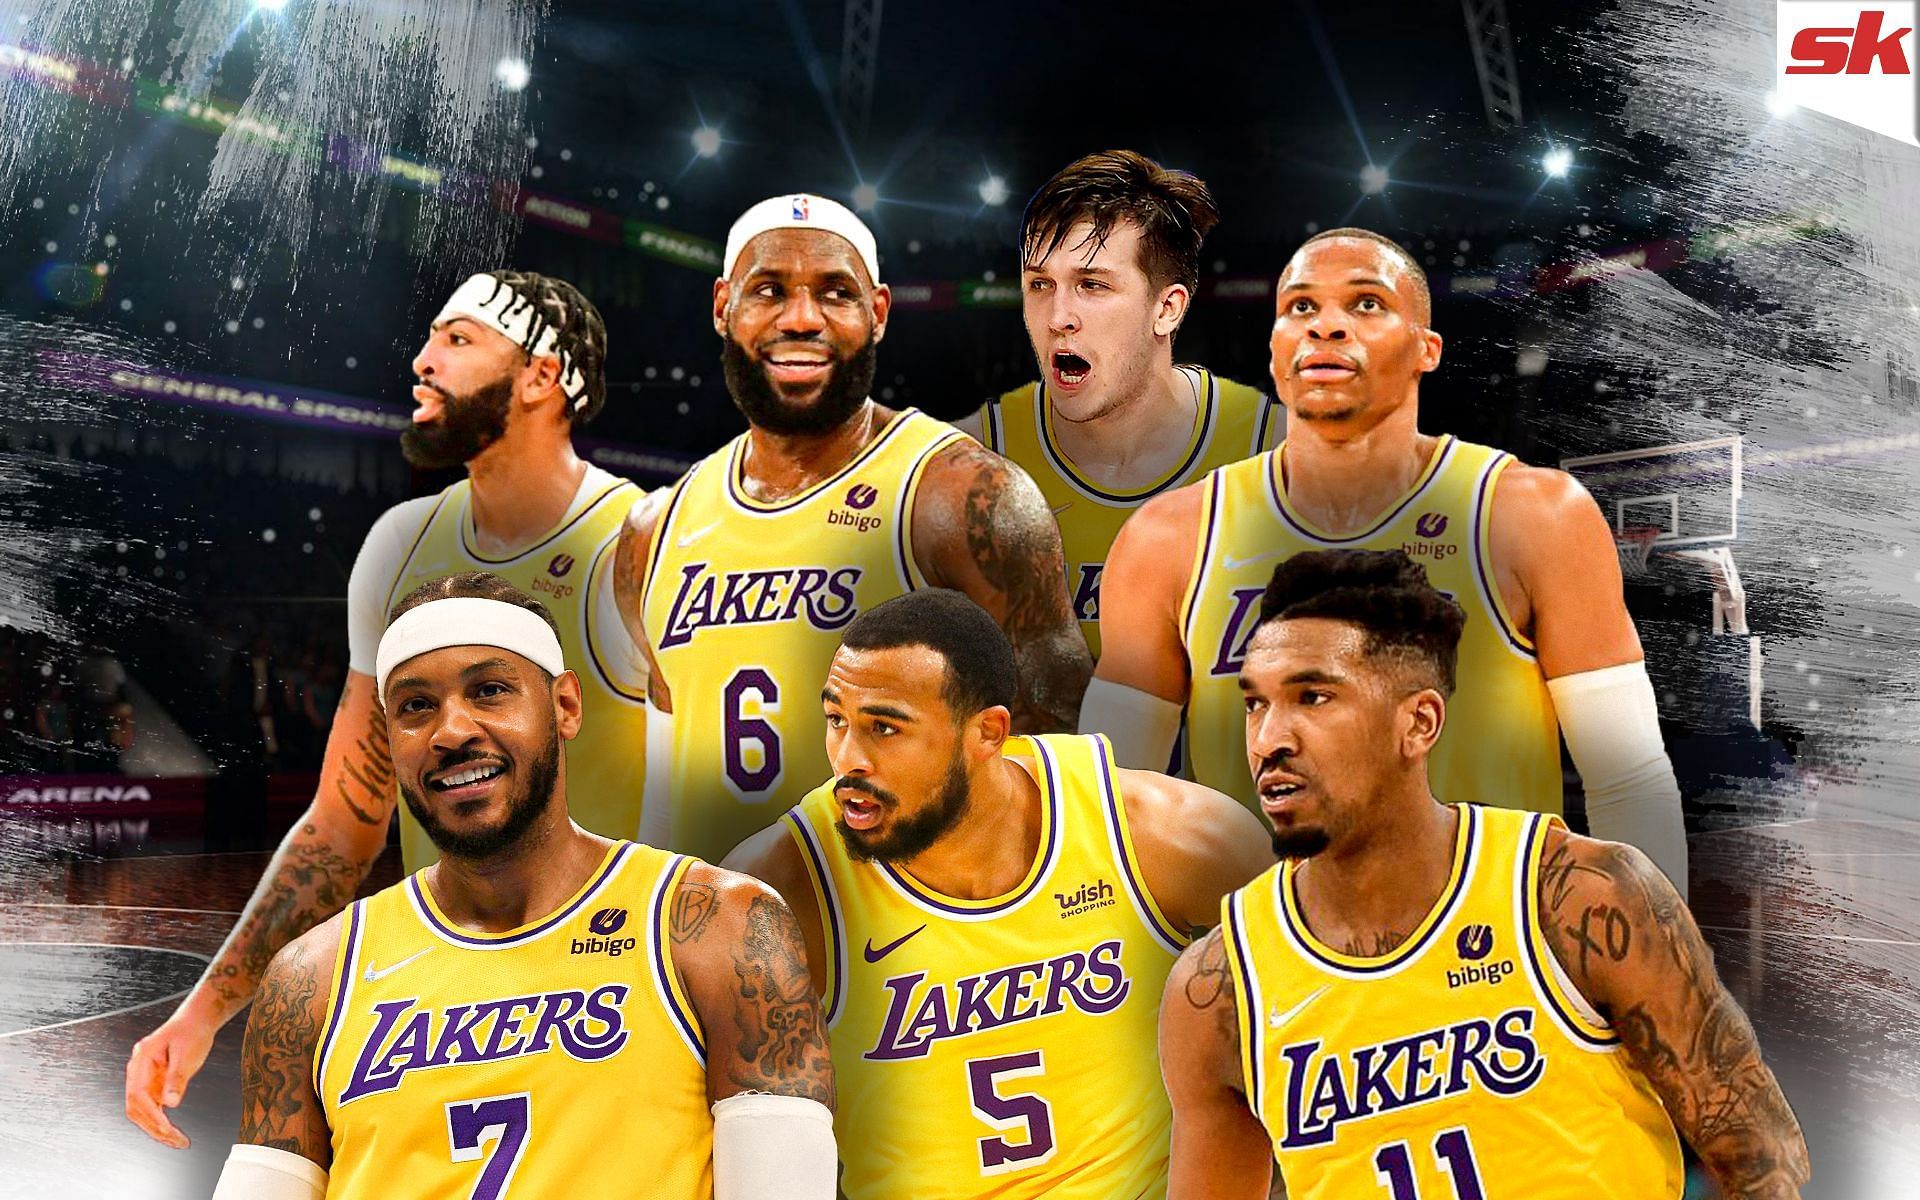 The Lakers are looking to move on from one of their superstars